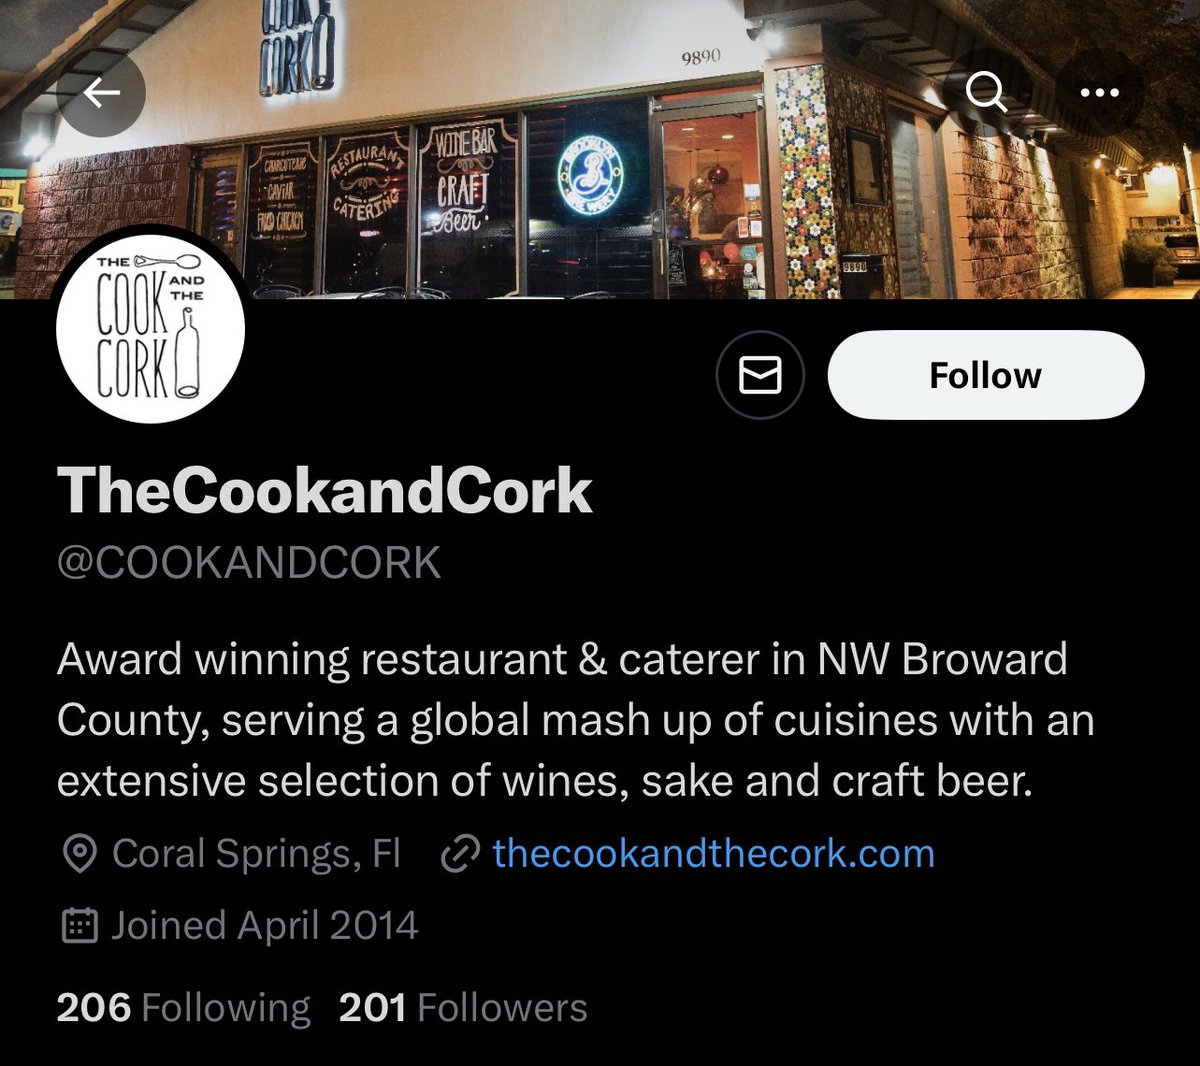 In light of this, I strongly urge anyone reading this to share my story and hold Keith Blauschild and Dena Lowell Blauschild accountable. Please do not support them or their restaurant, @COOKANDCORK.